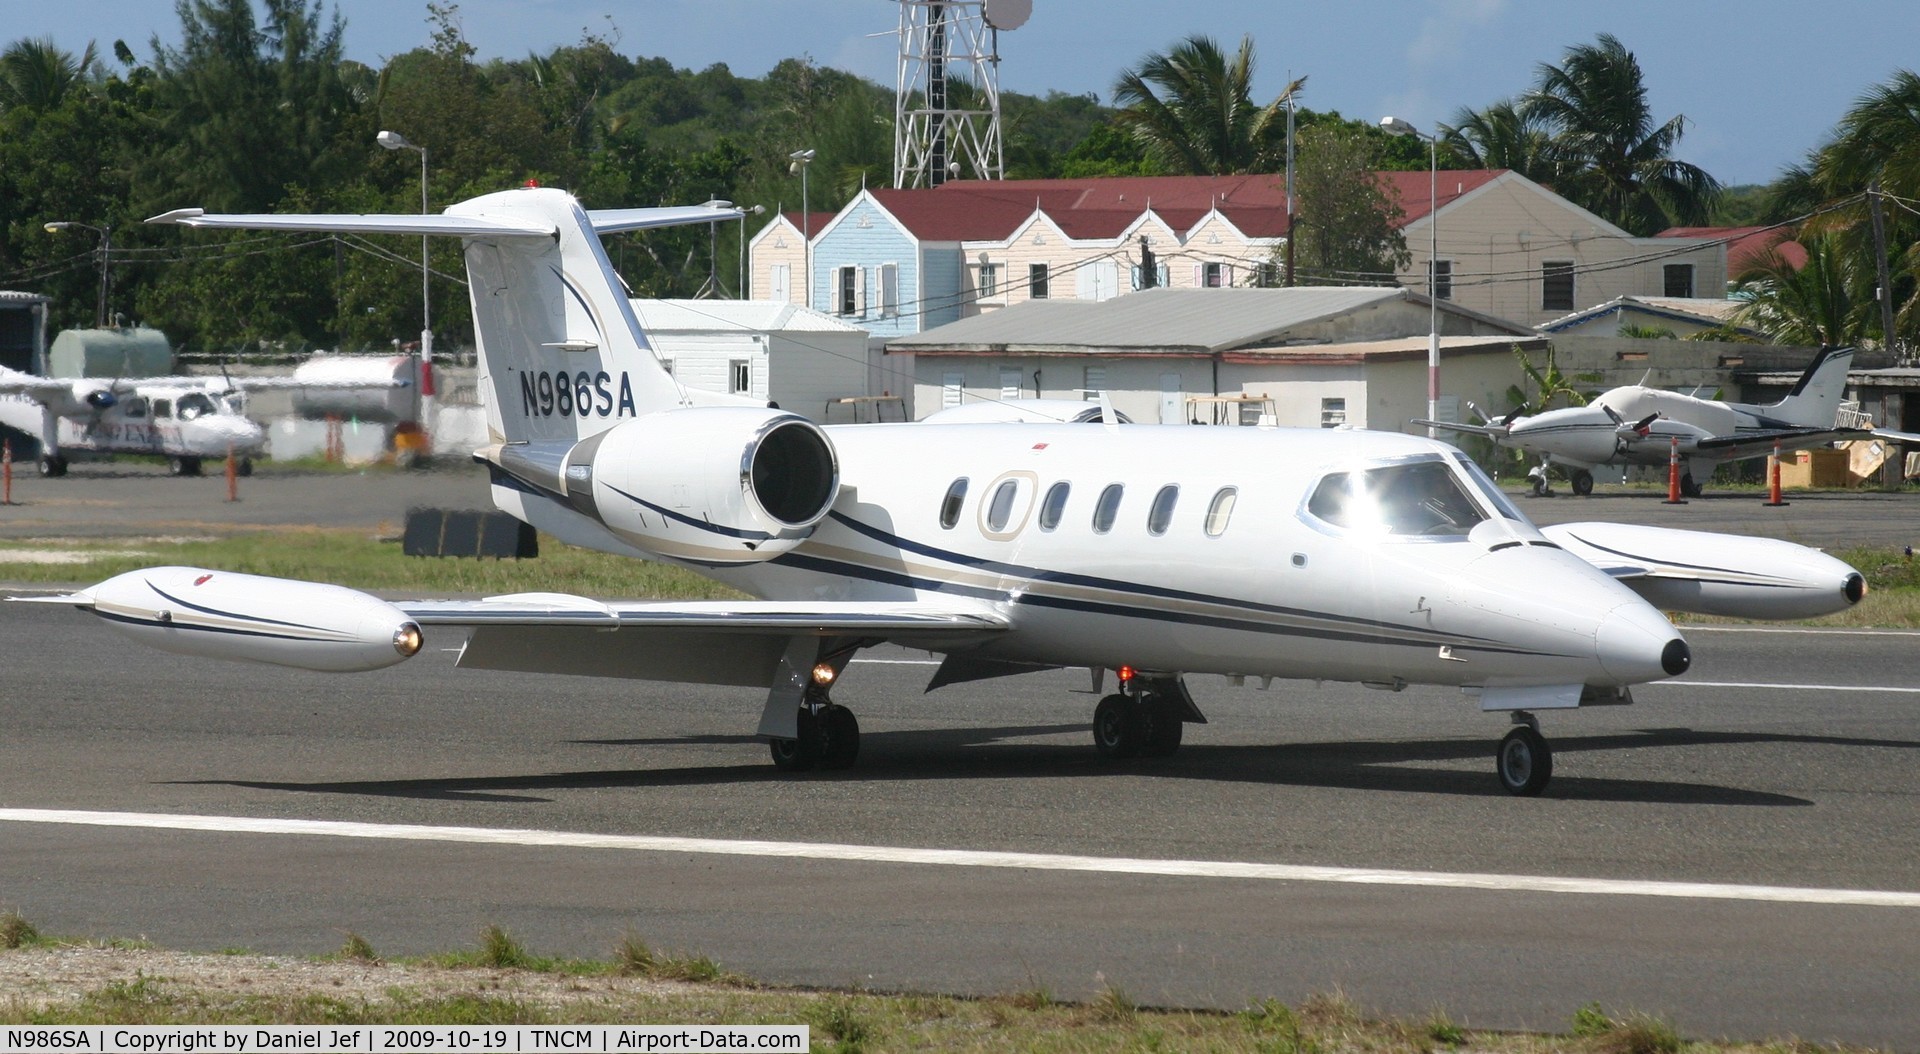 N986SA, 1985 Gates Learjet 35A C/N 609, just landed at tncm